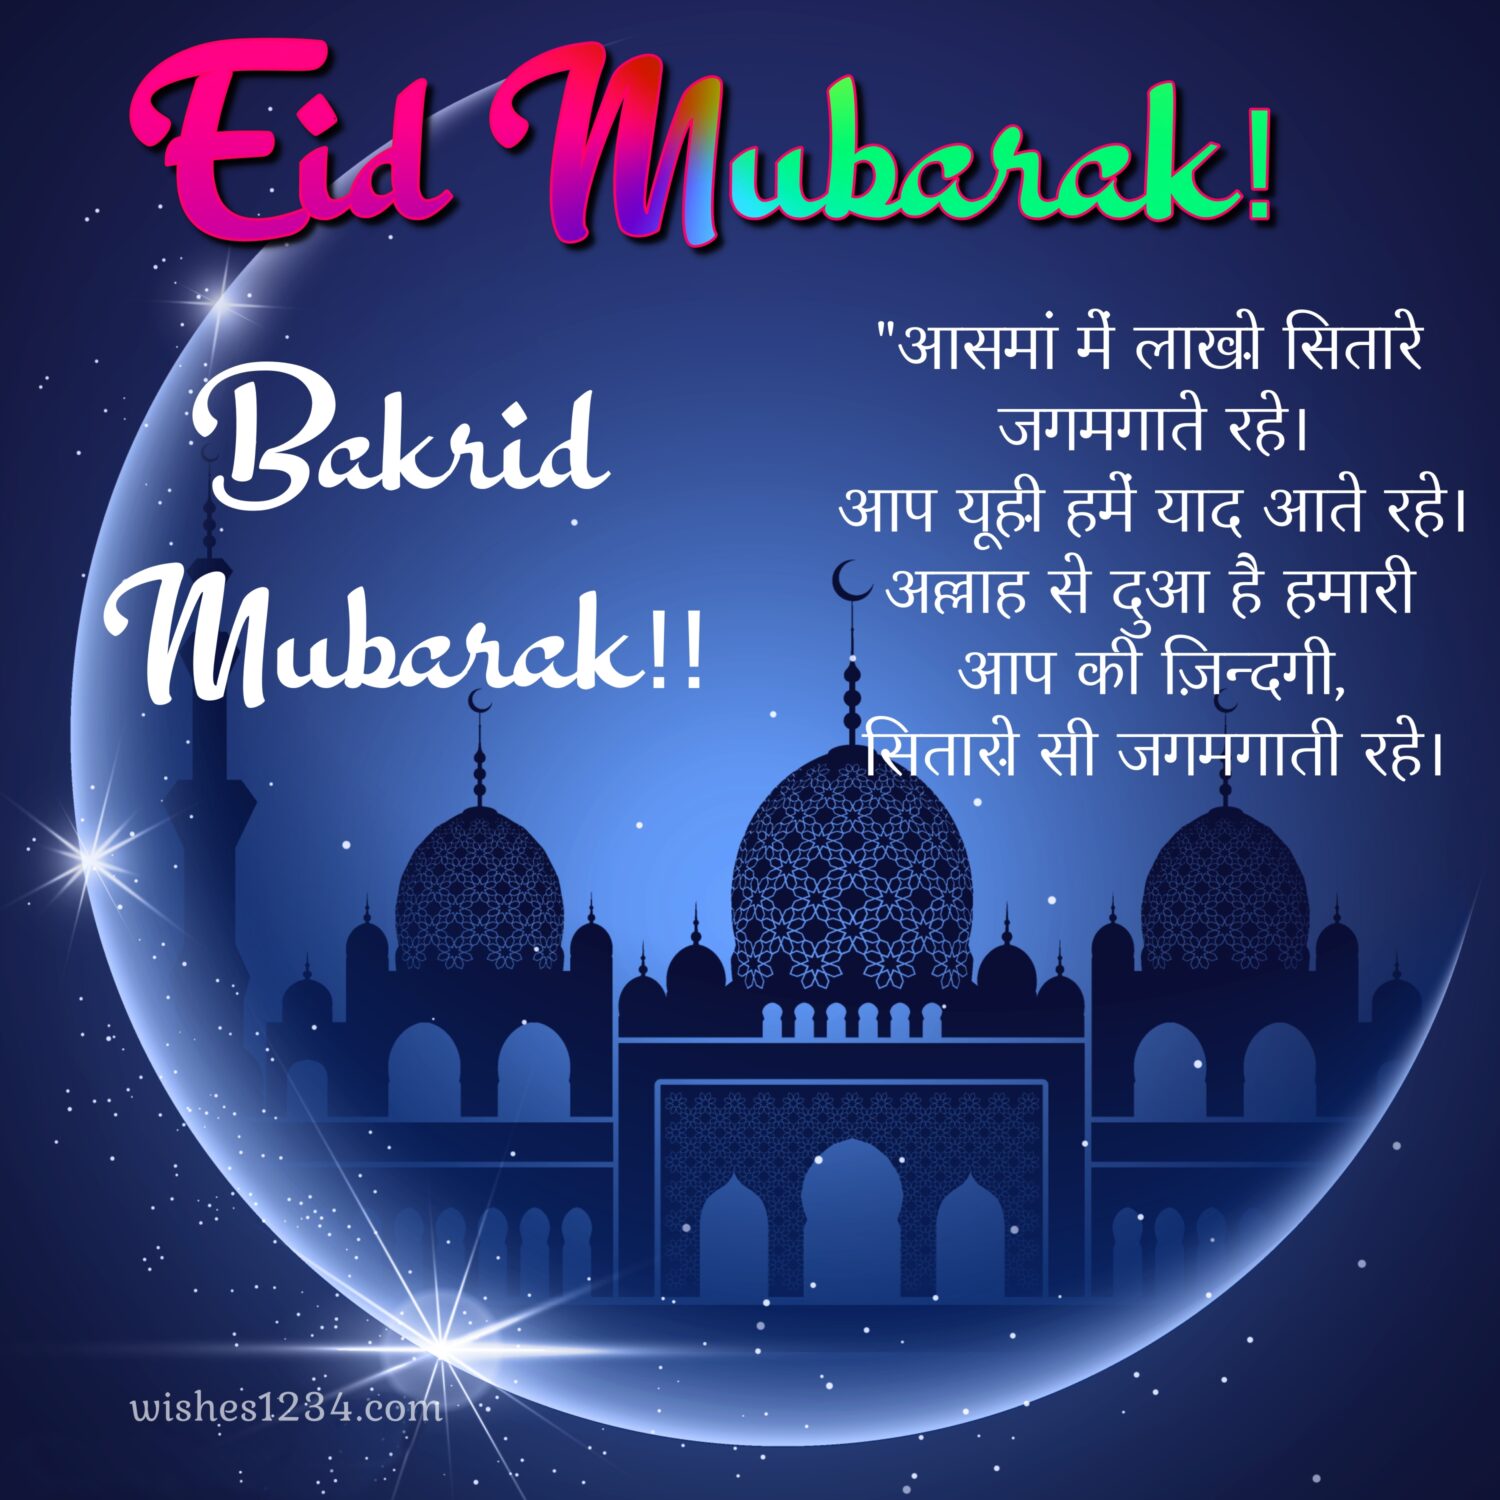 Eid Mubarak with moon crecent and mosque outlines, Eid al Adha | Bakrid wishes.